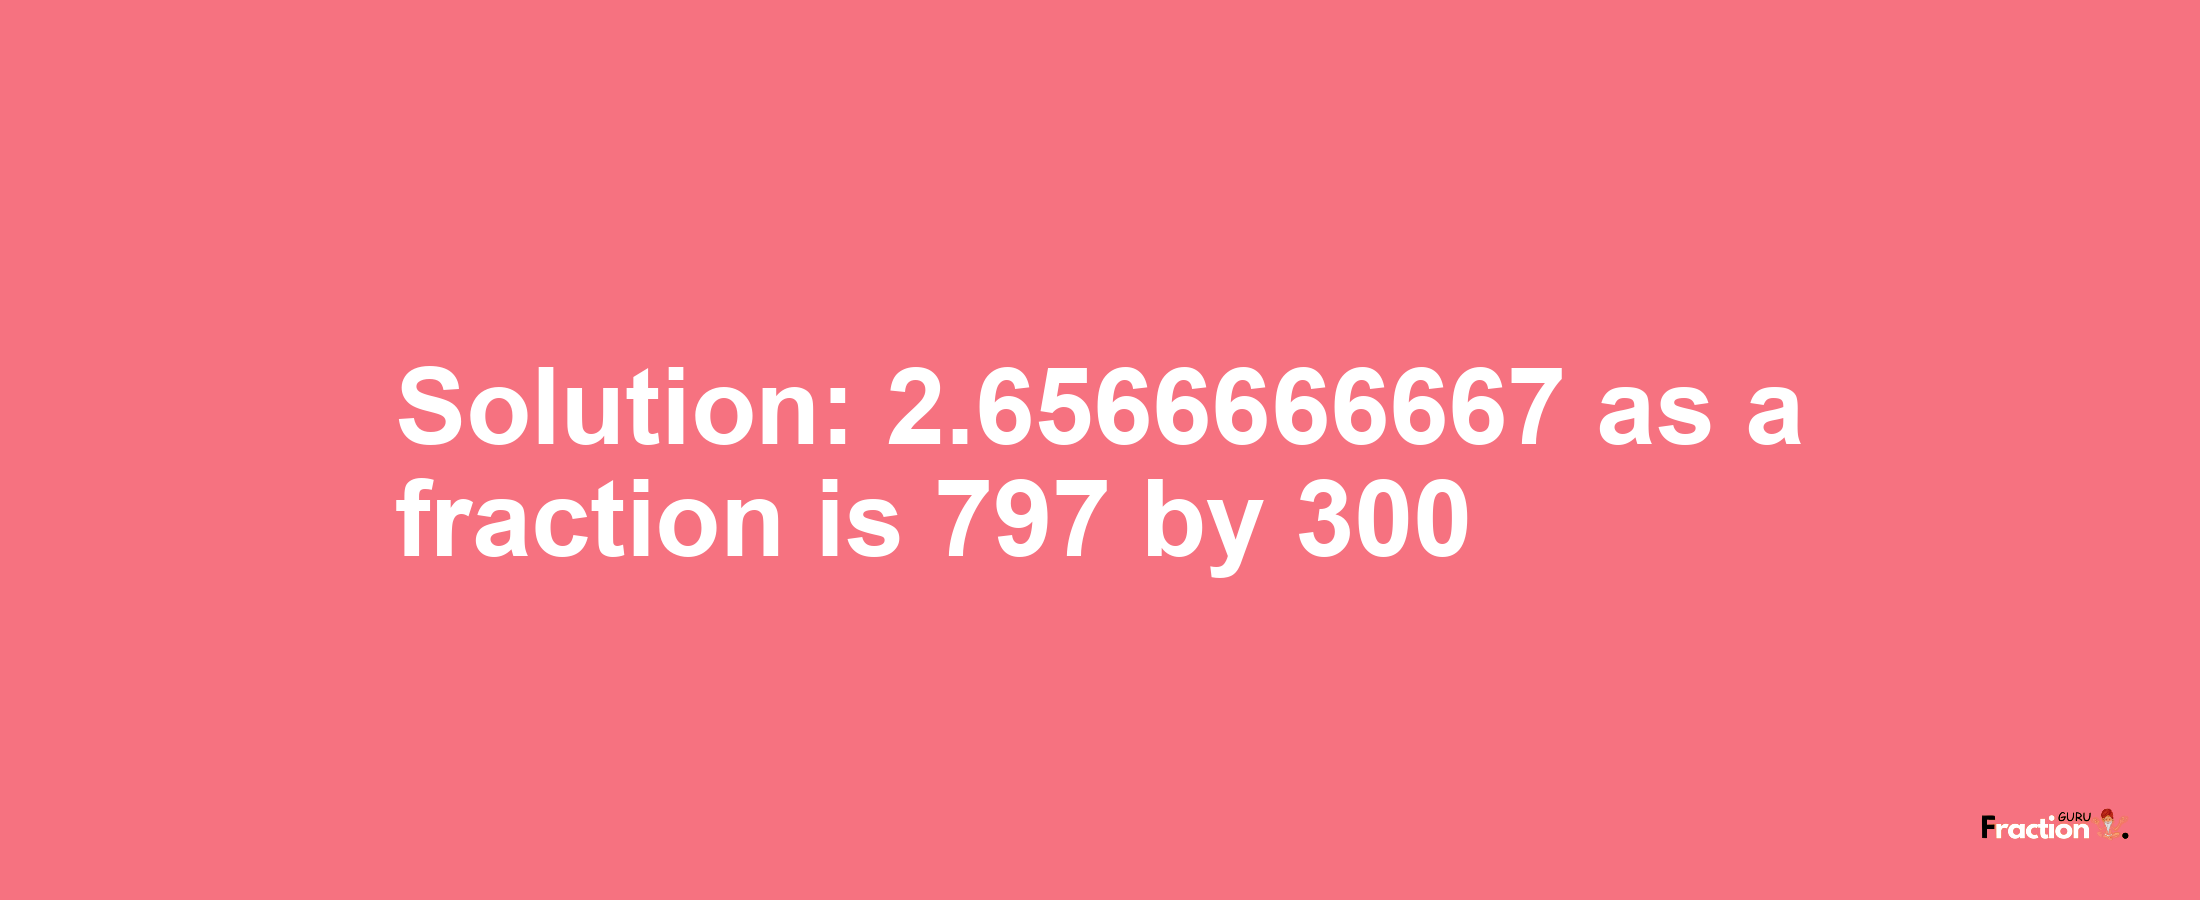 Solution:2.6566666667 as a fraction is 797/300